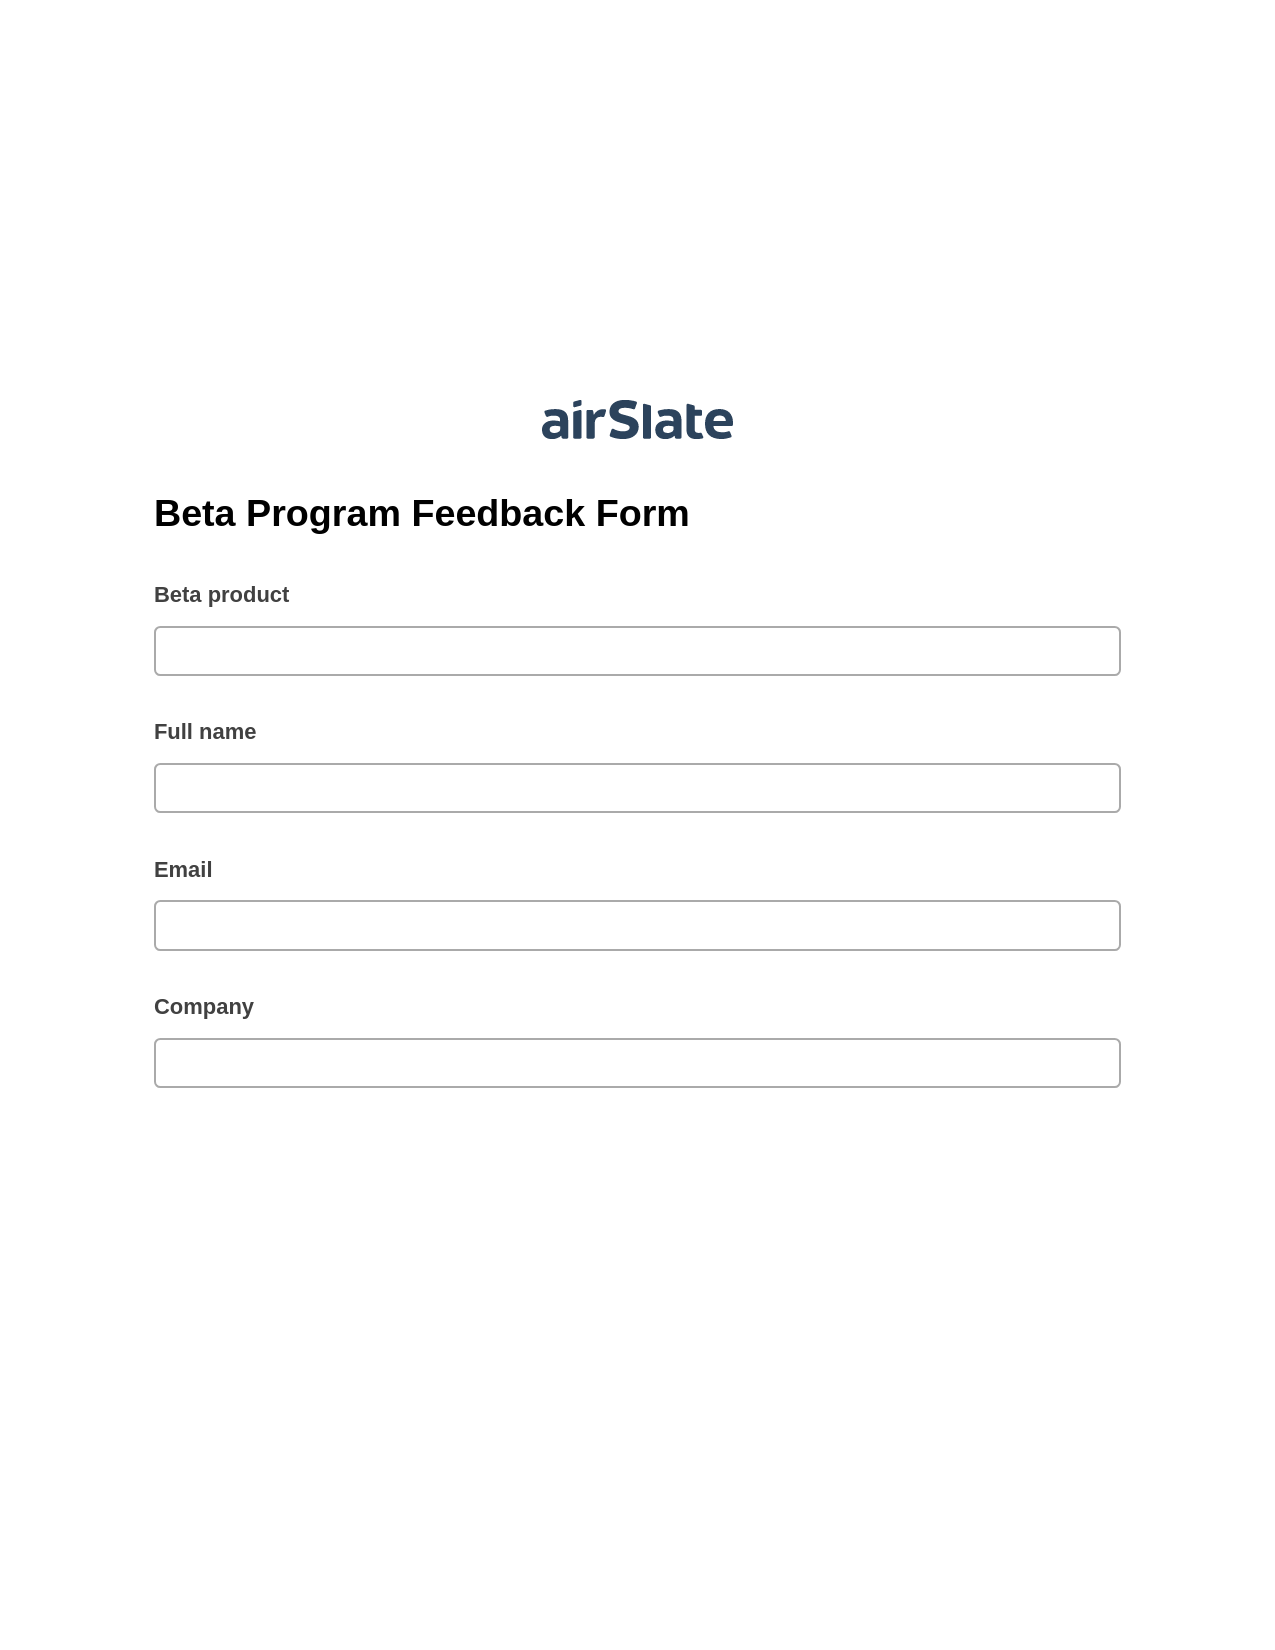 Beta Program Feedback Form Pre-fill from another Slate Bot, Create QuickBooks invoice Bot, Export to Smartsheet